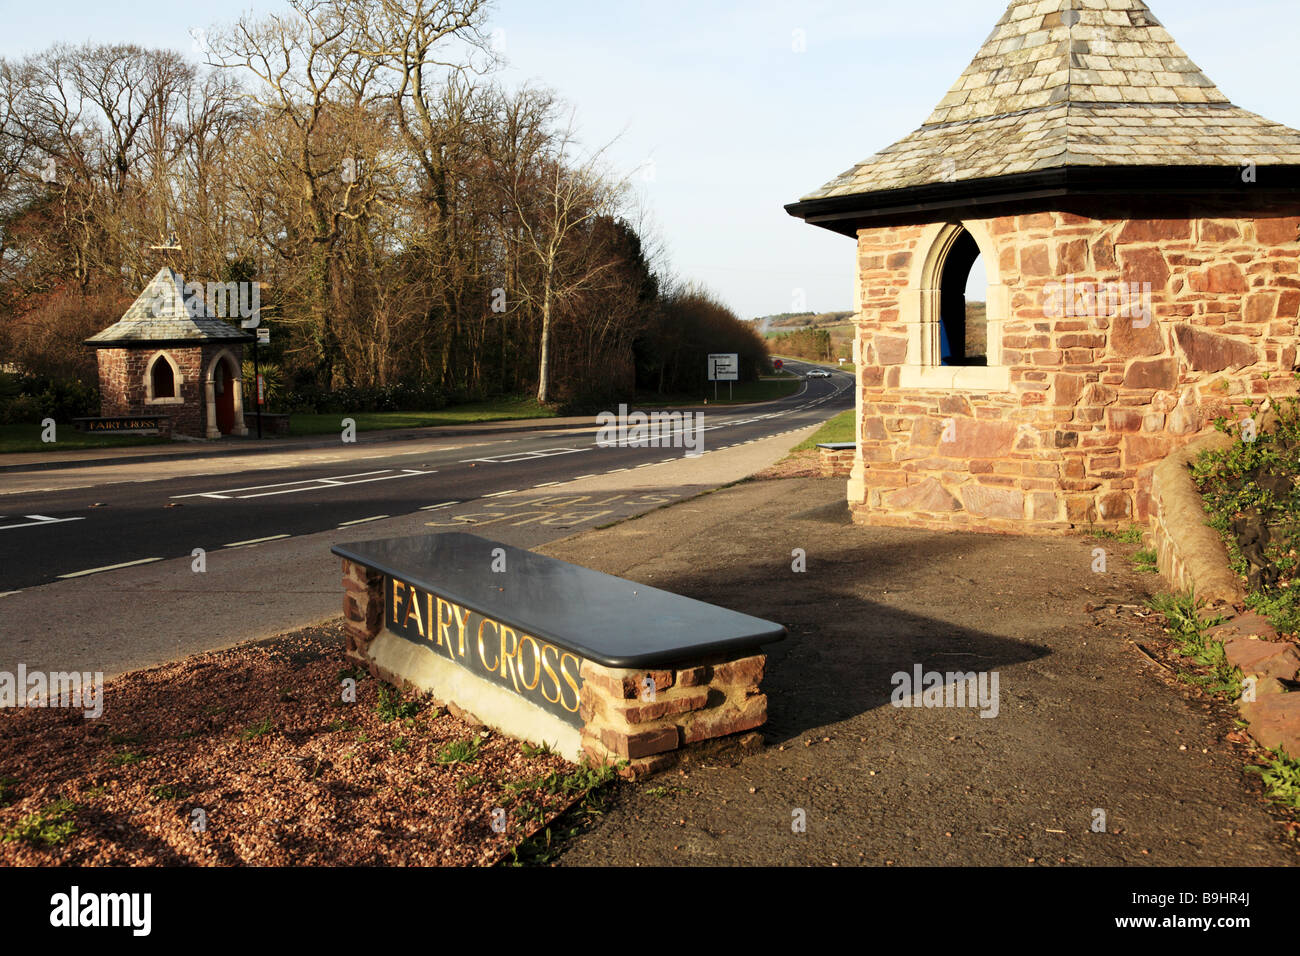 Two ornate bus stops on a main road at Fairy Cross,Devon Stock Photo